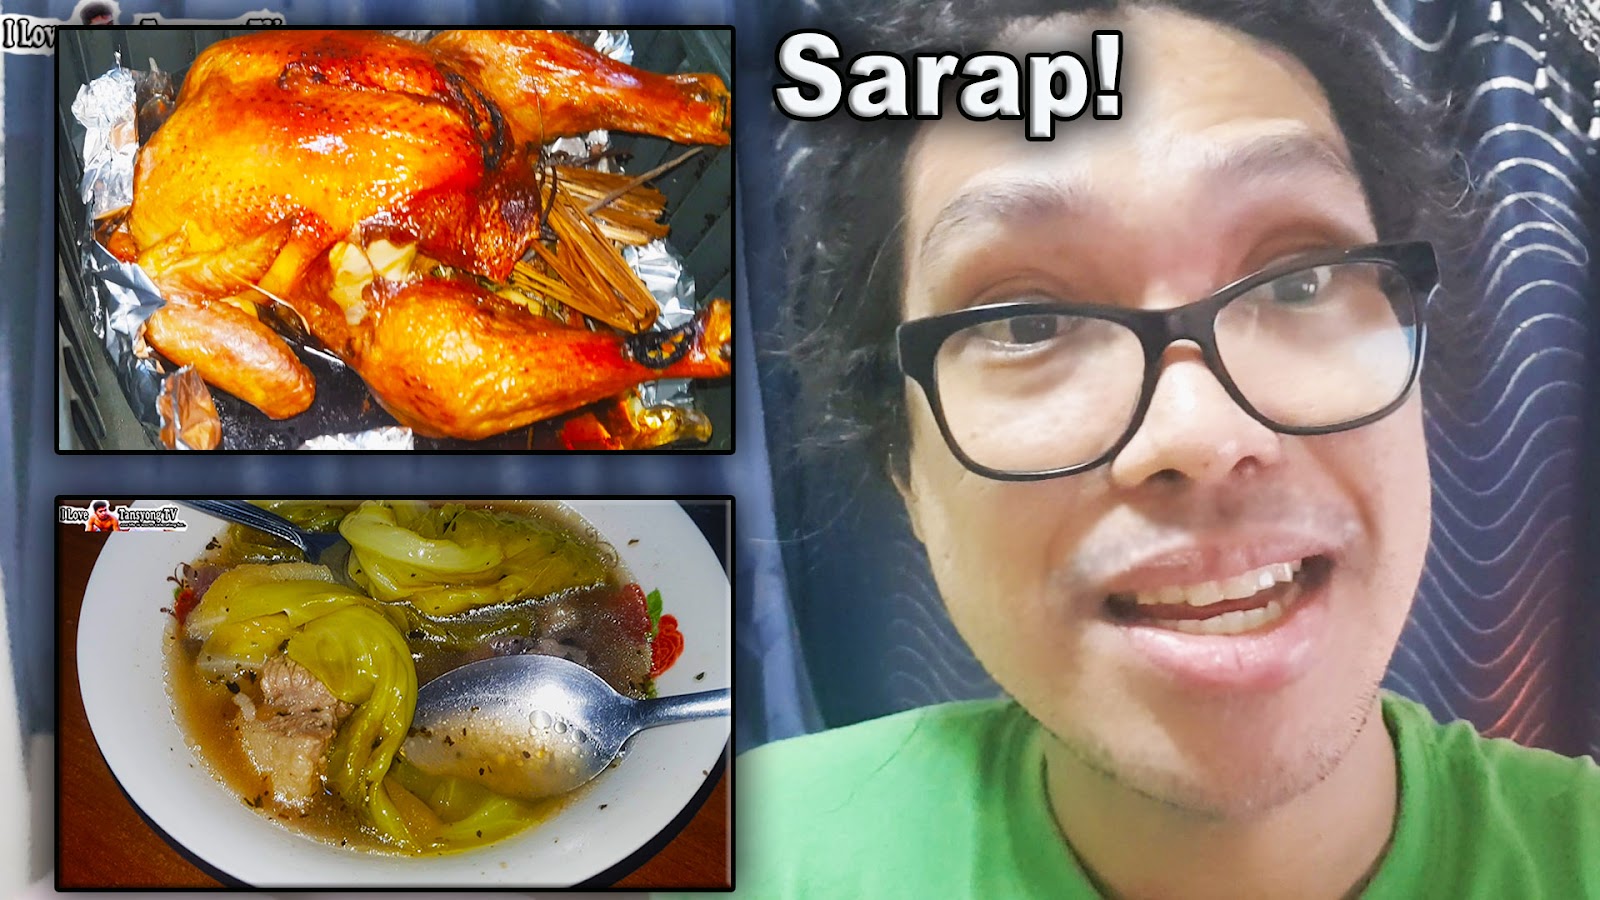 simple life in manila philippines,microliving philippines,life in small condo apartment,mandaluyong vlogger,urban deca tower edsa review,cooking inside condo,small apartment life hacks,day in the life small apartment,nilagang baka recipe filipino style,nilagang baka recipe,lechon manok recipe,lechon manok,air fry chicken,chicken rotisserie,anti rabies for cats,vrp hospital,micro living condo philippines,simple life in the philippines,micro living philippines